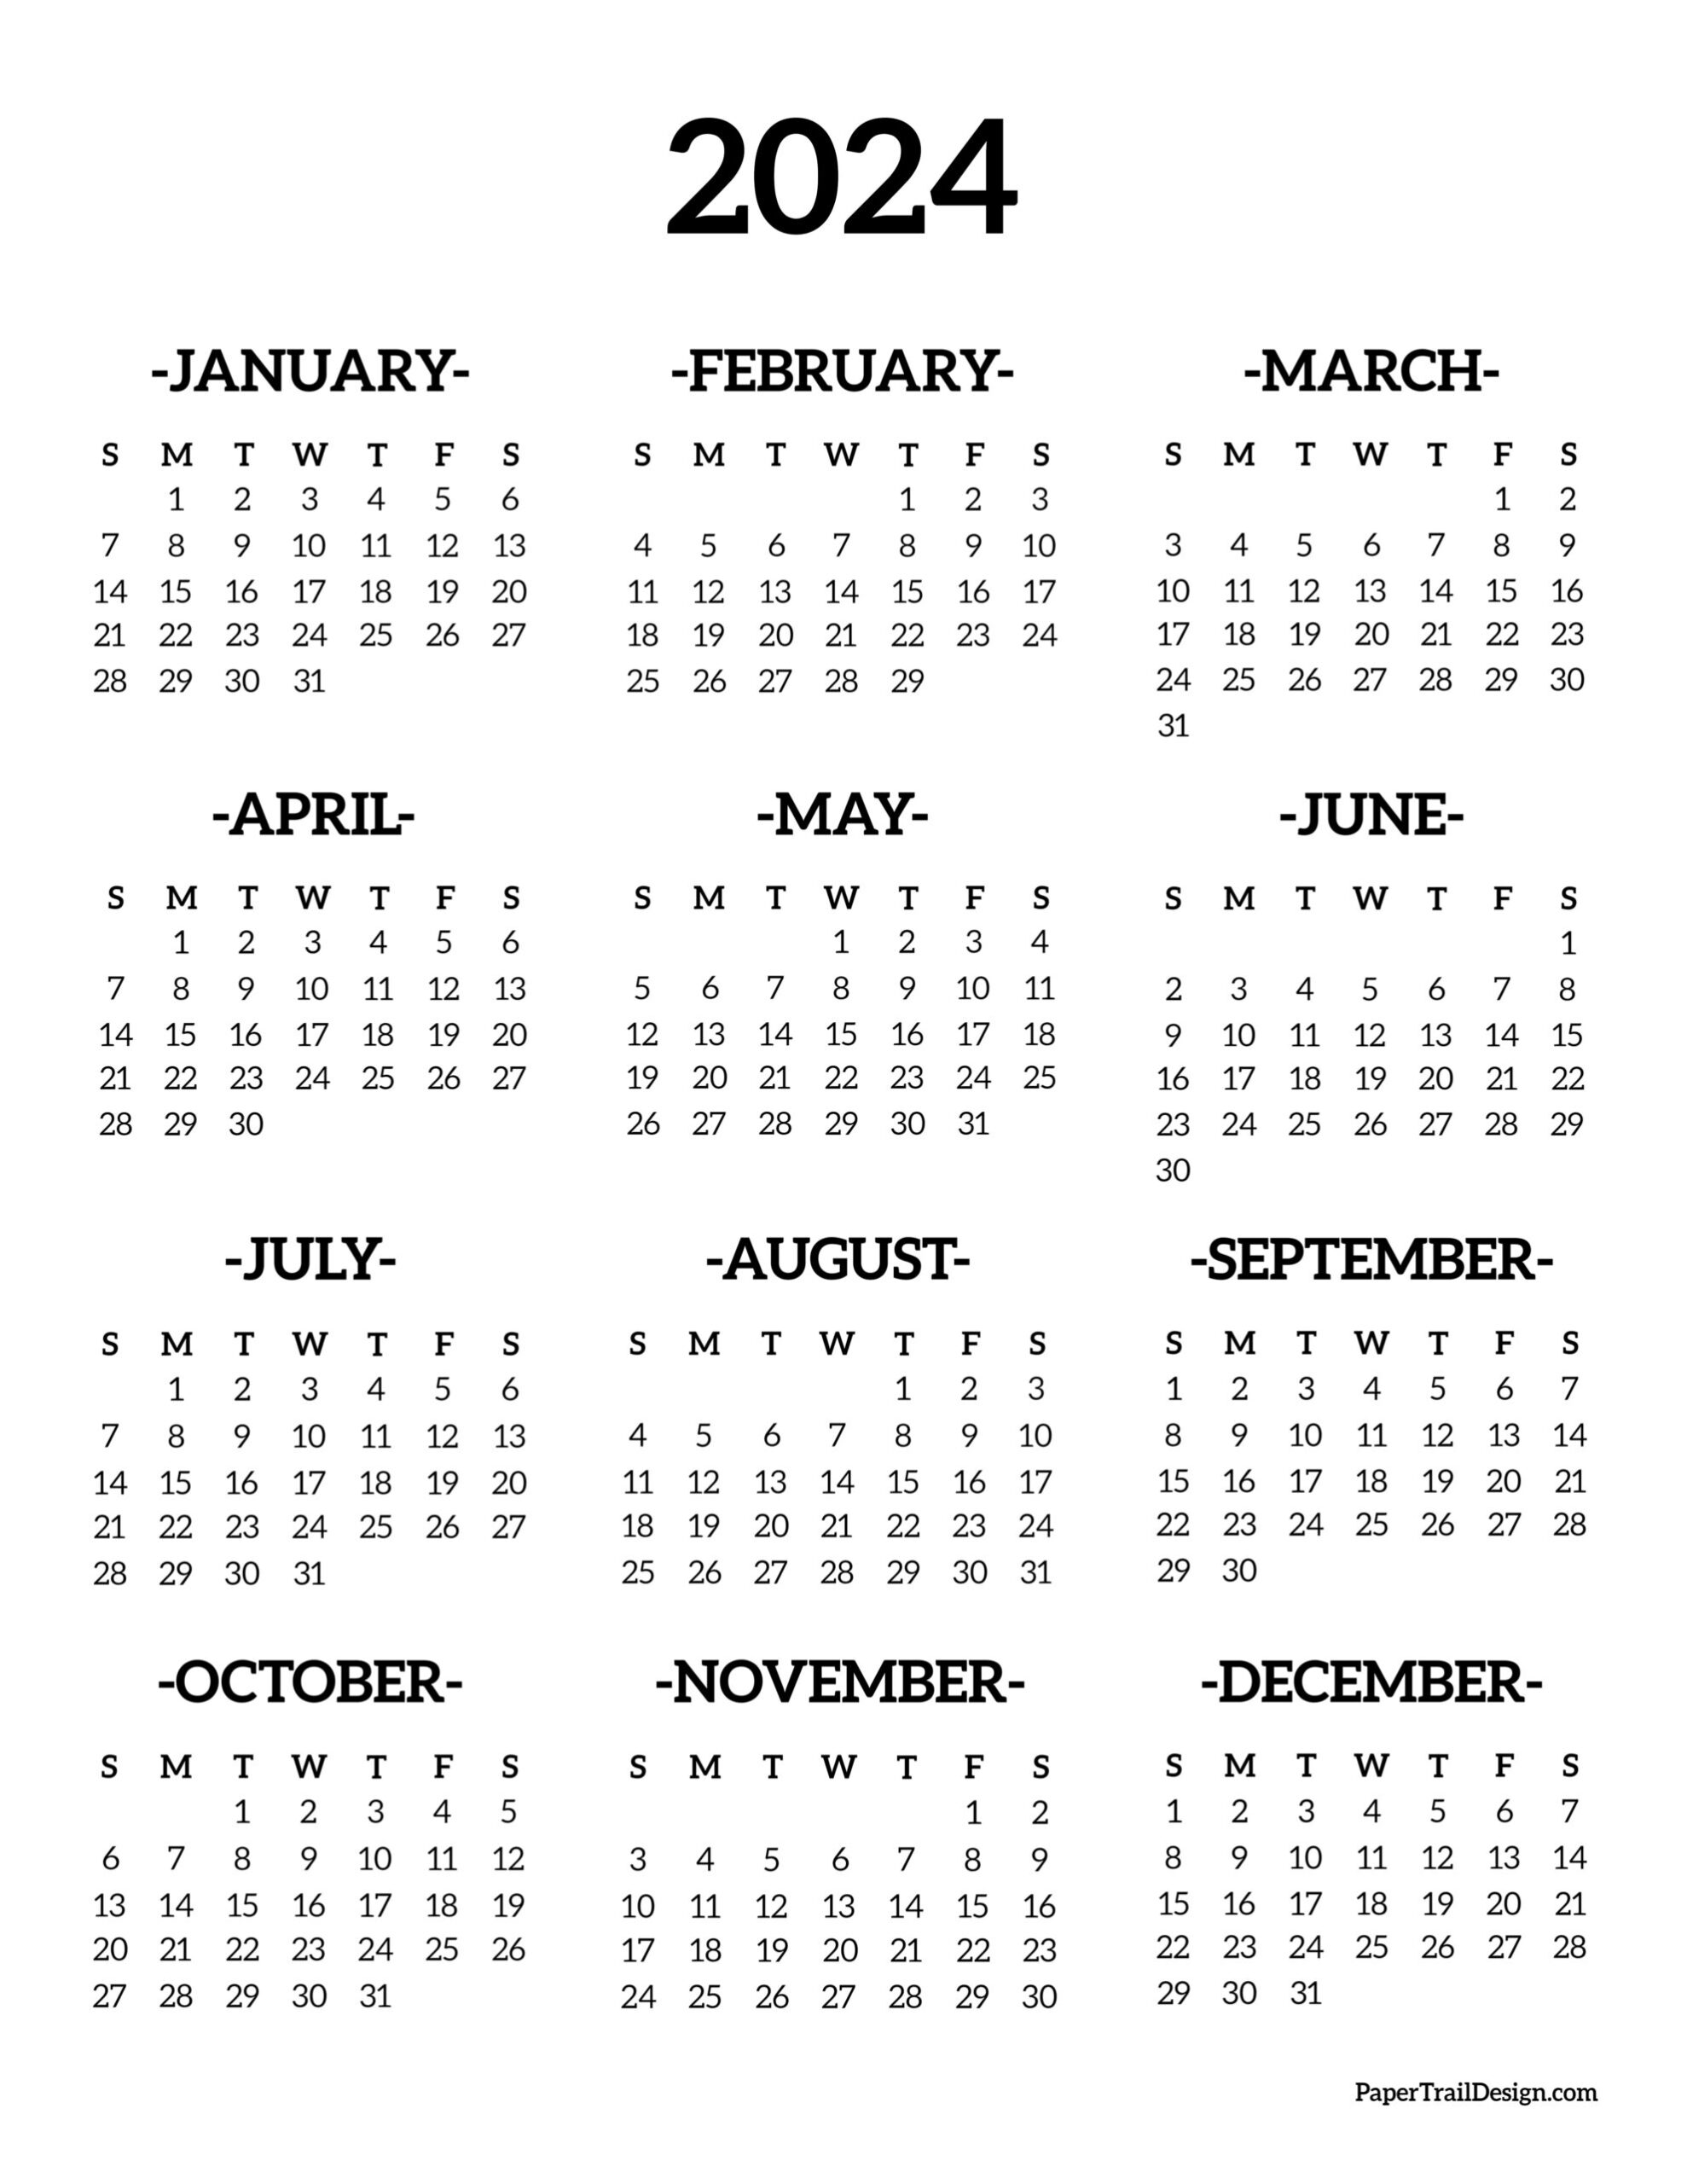 Calendar 2024 Printable One Page - Paper Trail Design for 2024 Free Printable Yearly Calendar